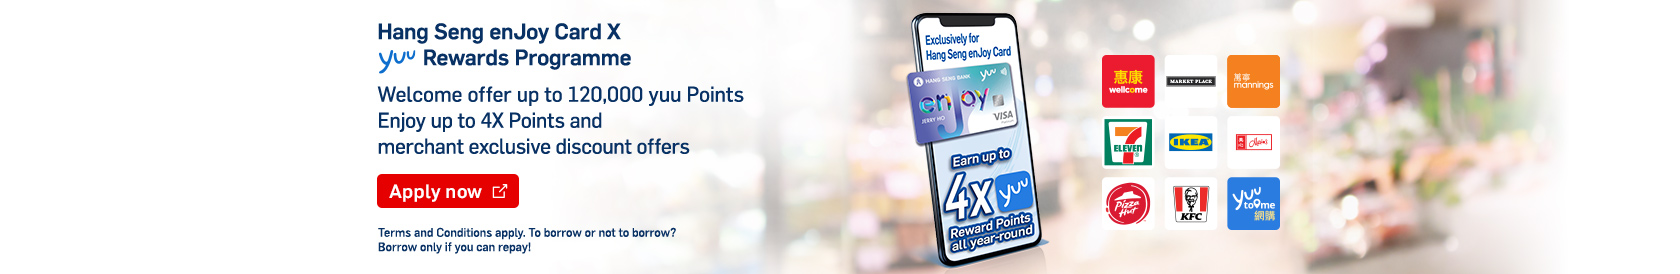 Apply now, Hang Seng enJoy Card x yuu Rewards Programme – Earn up to 4X Points all year-round, HKD1,400 worth of designated merchant e-Coupons and up to 80,000 points as welcome offer